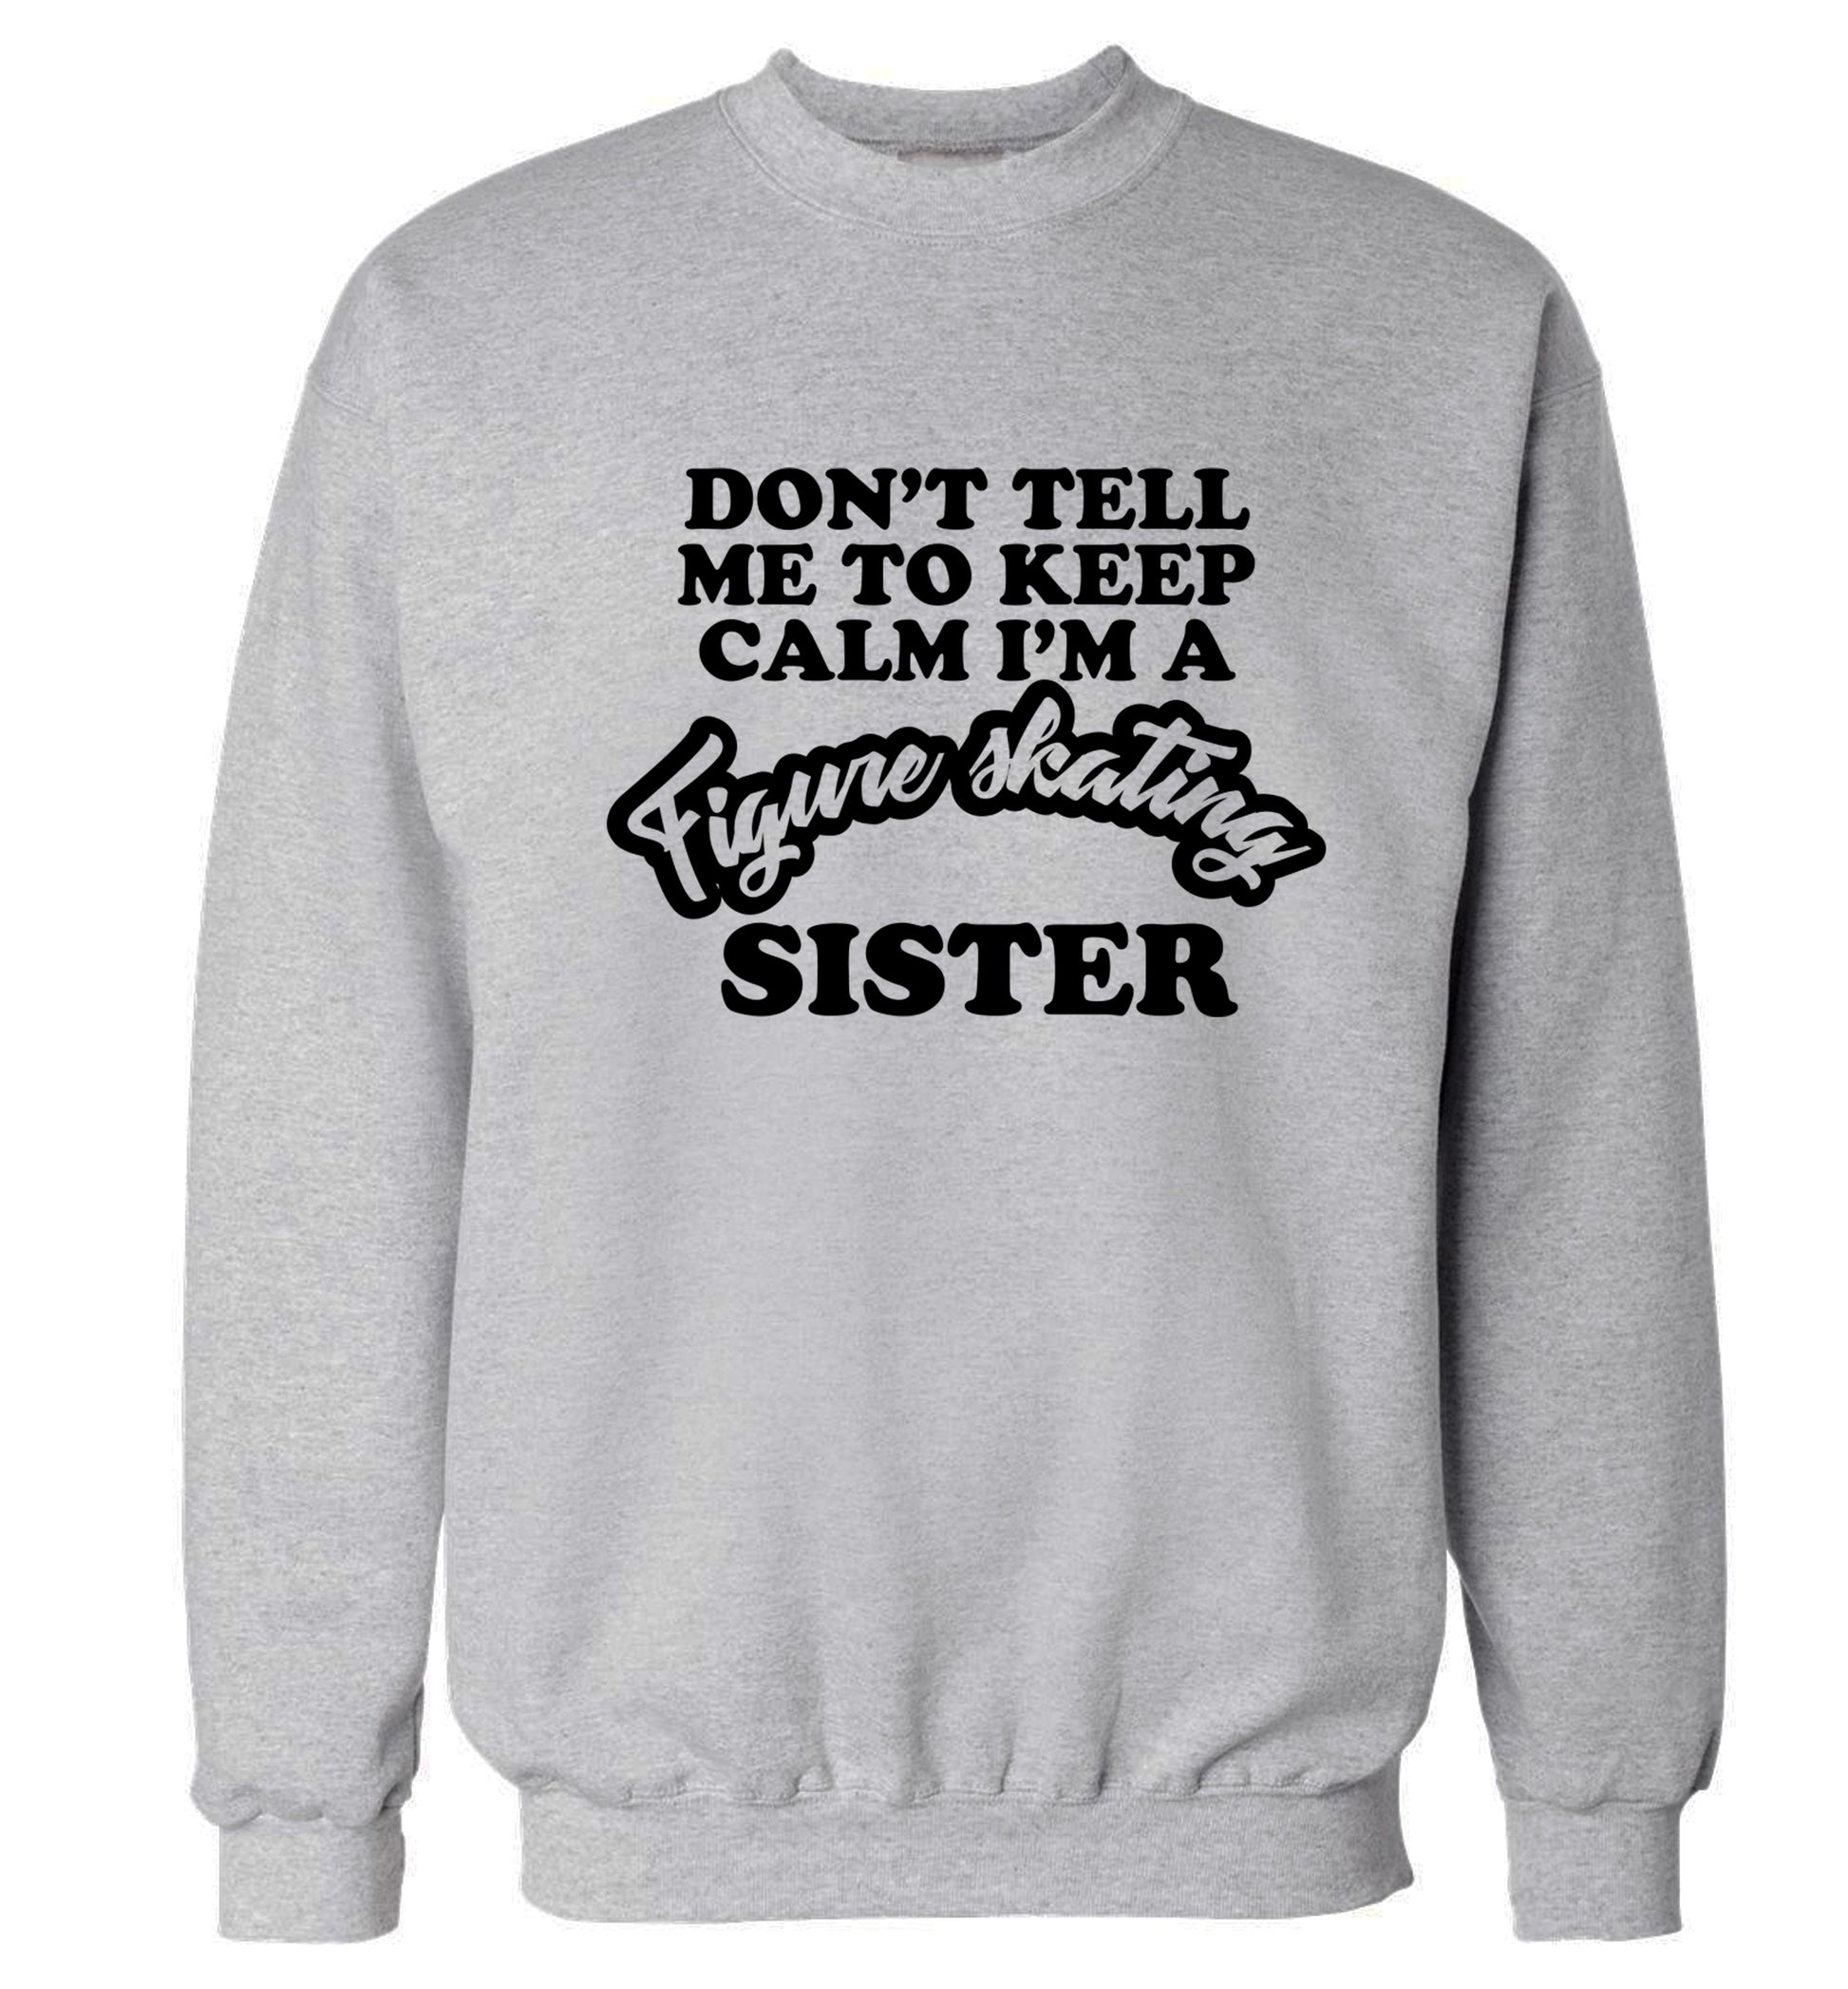 Don't tell me to keep calm I'm a figure skating sister Adult's unisexgrey Sweater 2XL